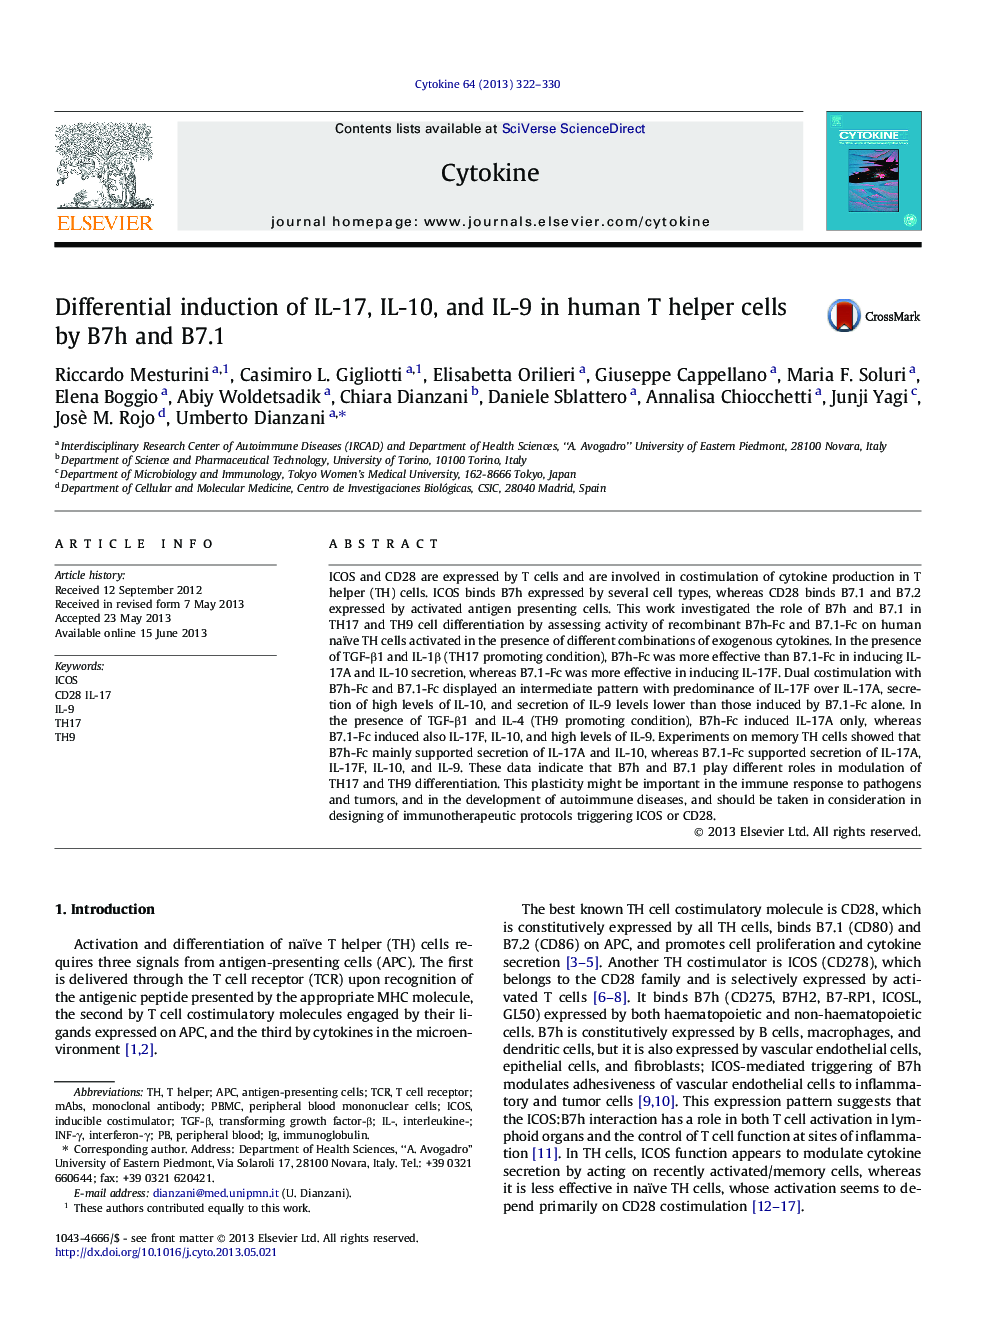 Differential induction of IL-17, IL-10, and IL-9 in human T helper cells by B7h and B7.1